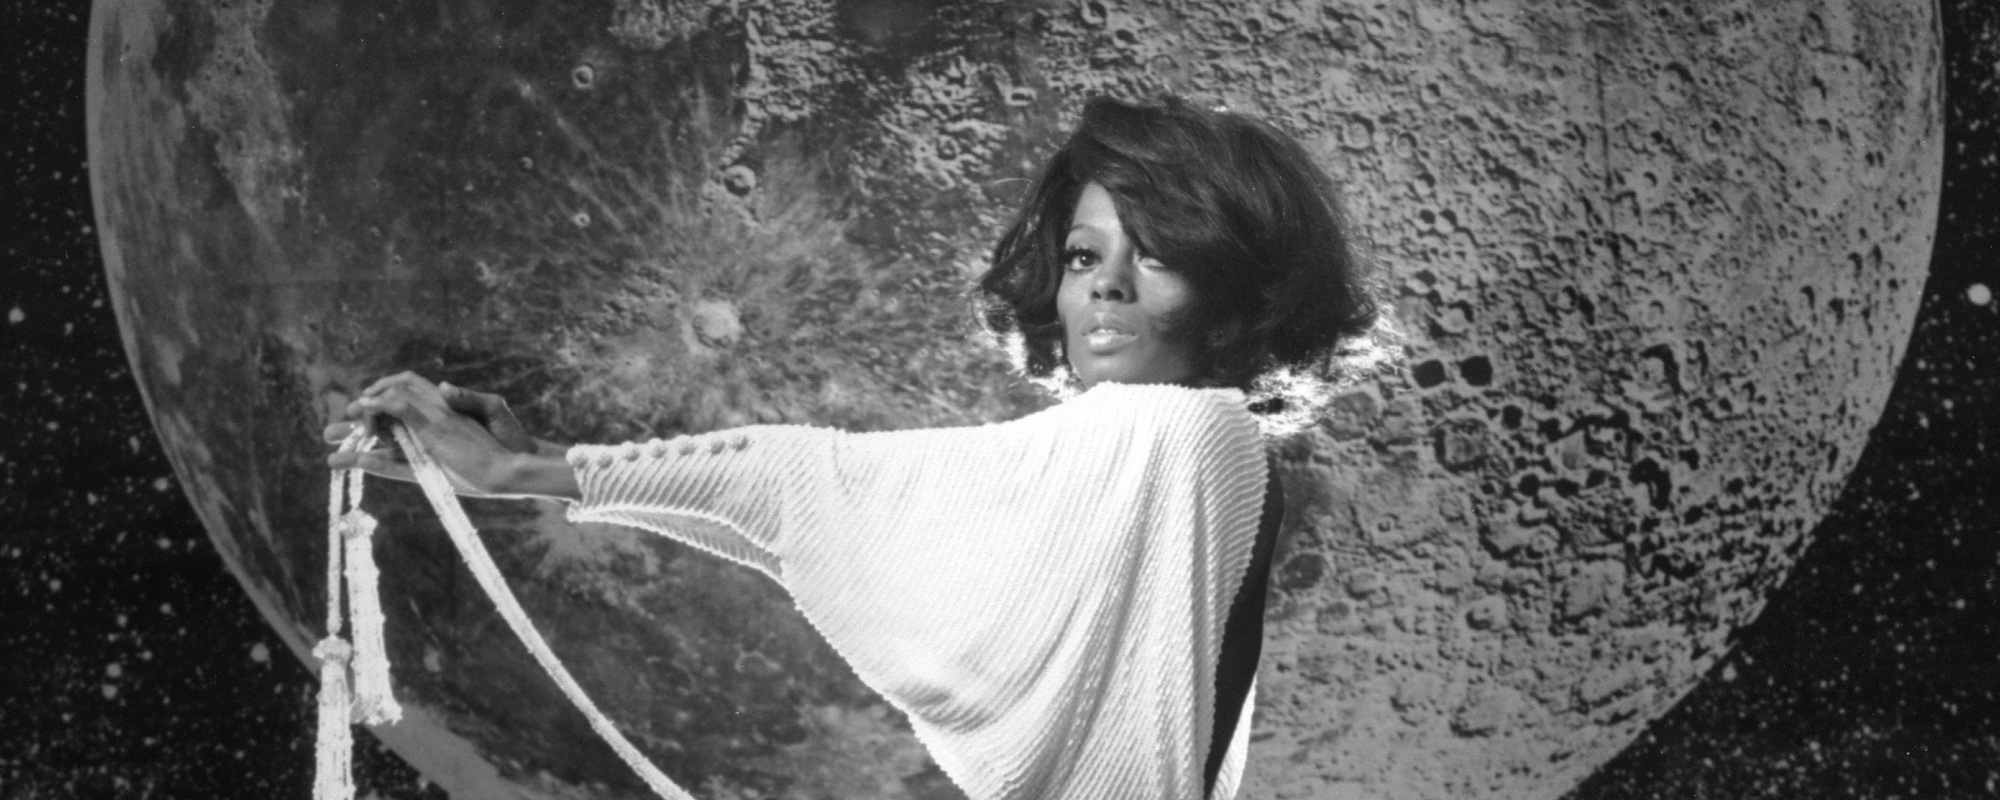 The Empowering Meaning Behind “Ain’t No Mountain High Enough” by Diana Ross